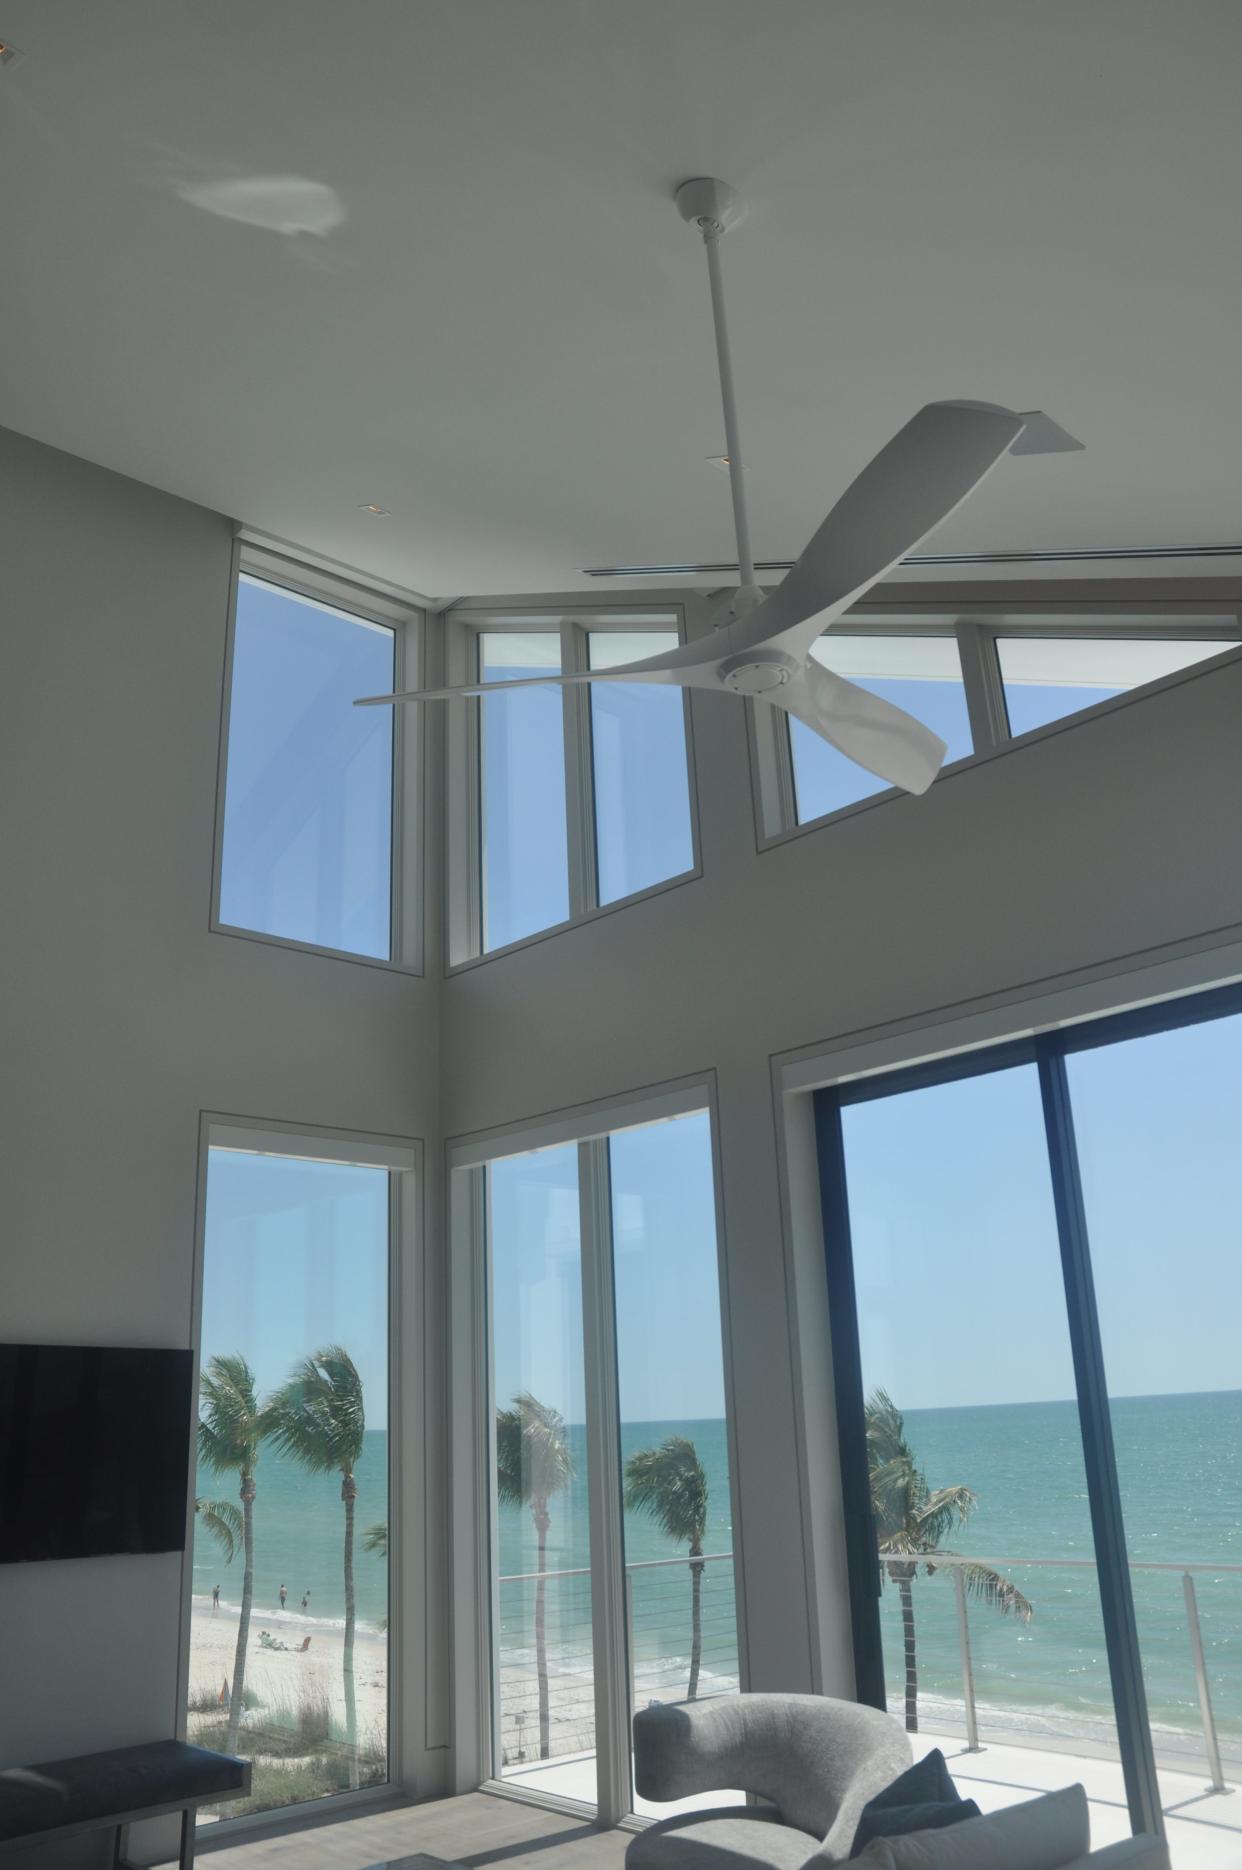 Sloping ceilings are prevalent in the top story of the home. They take the shape from the sails on the roof. Lots of windows bring in tremendous natural light.